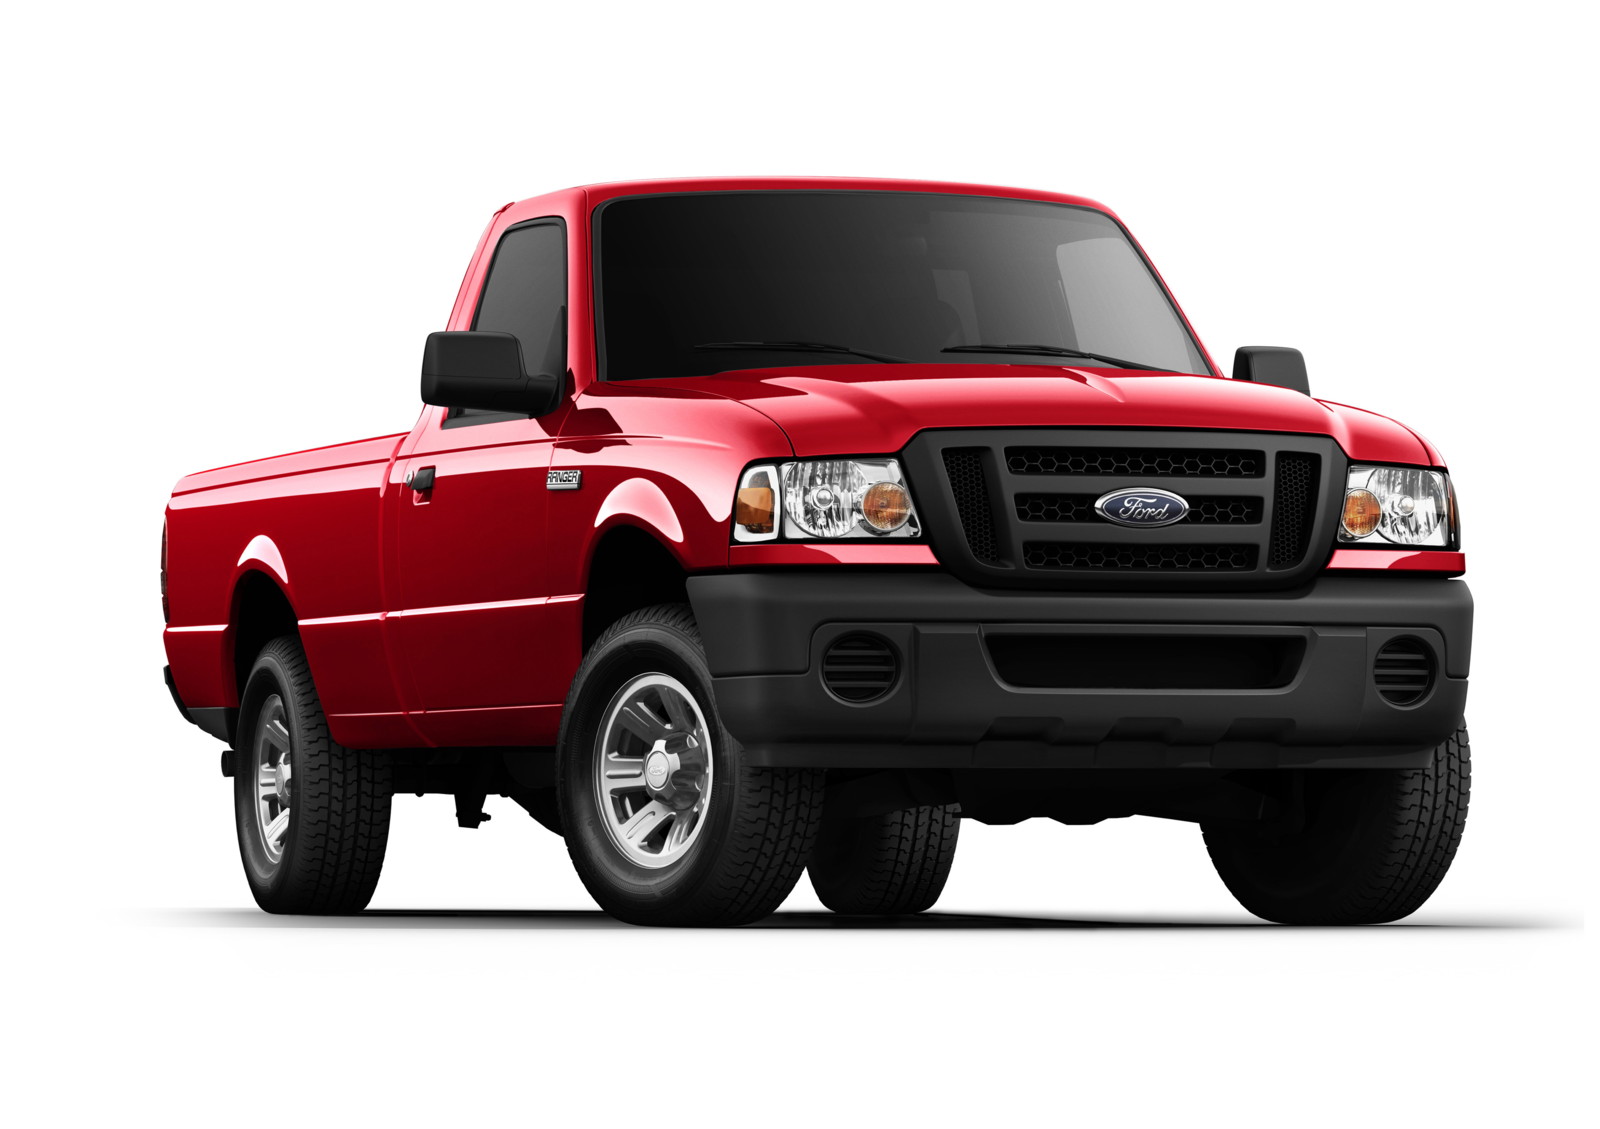 2010 Ford Ranger With 83000 Miles Will Cost You 23K at CarMax